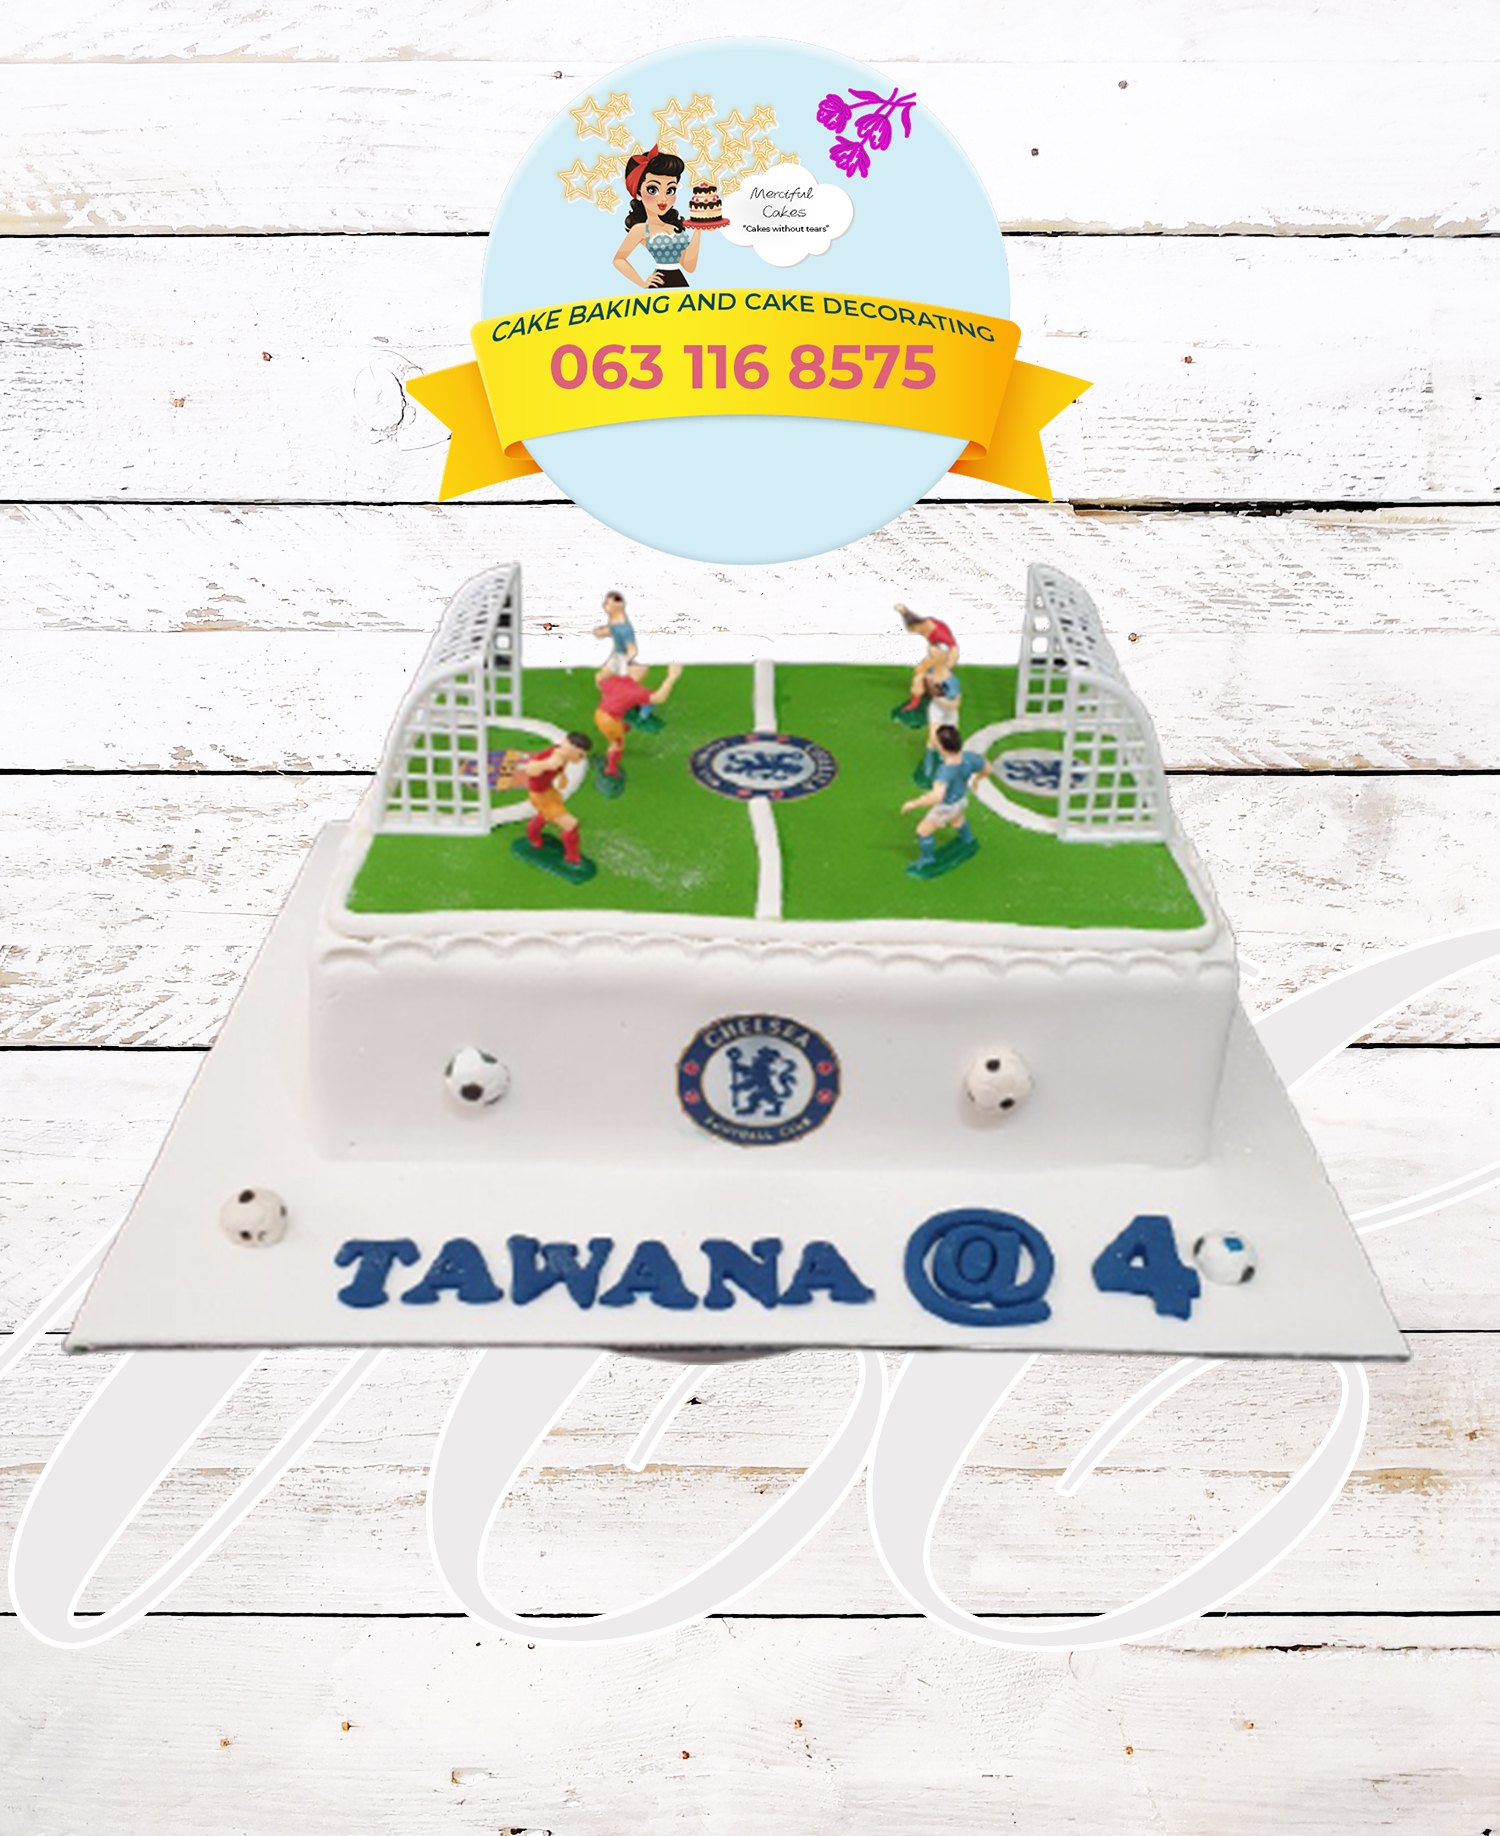 L'mis Cakes & Cupcakes Ipoh Contact : 012-5991233 : Soccer Field Cake